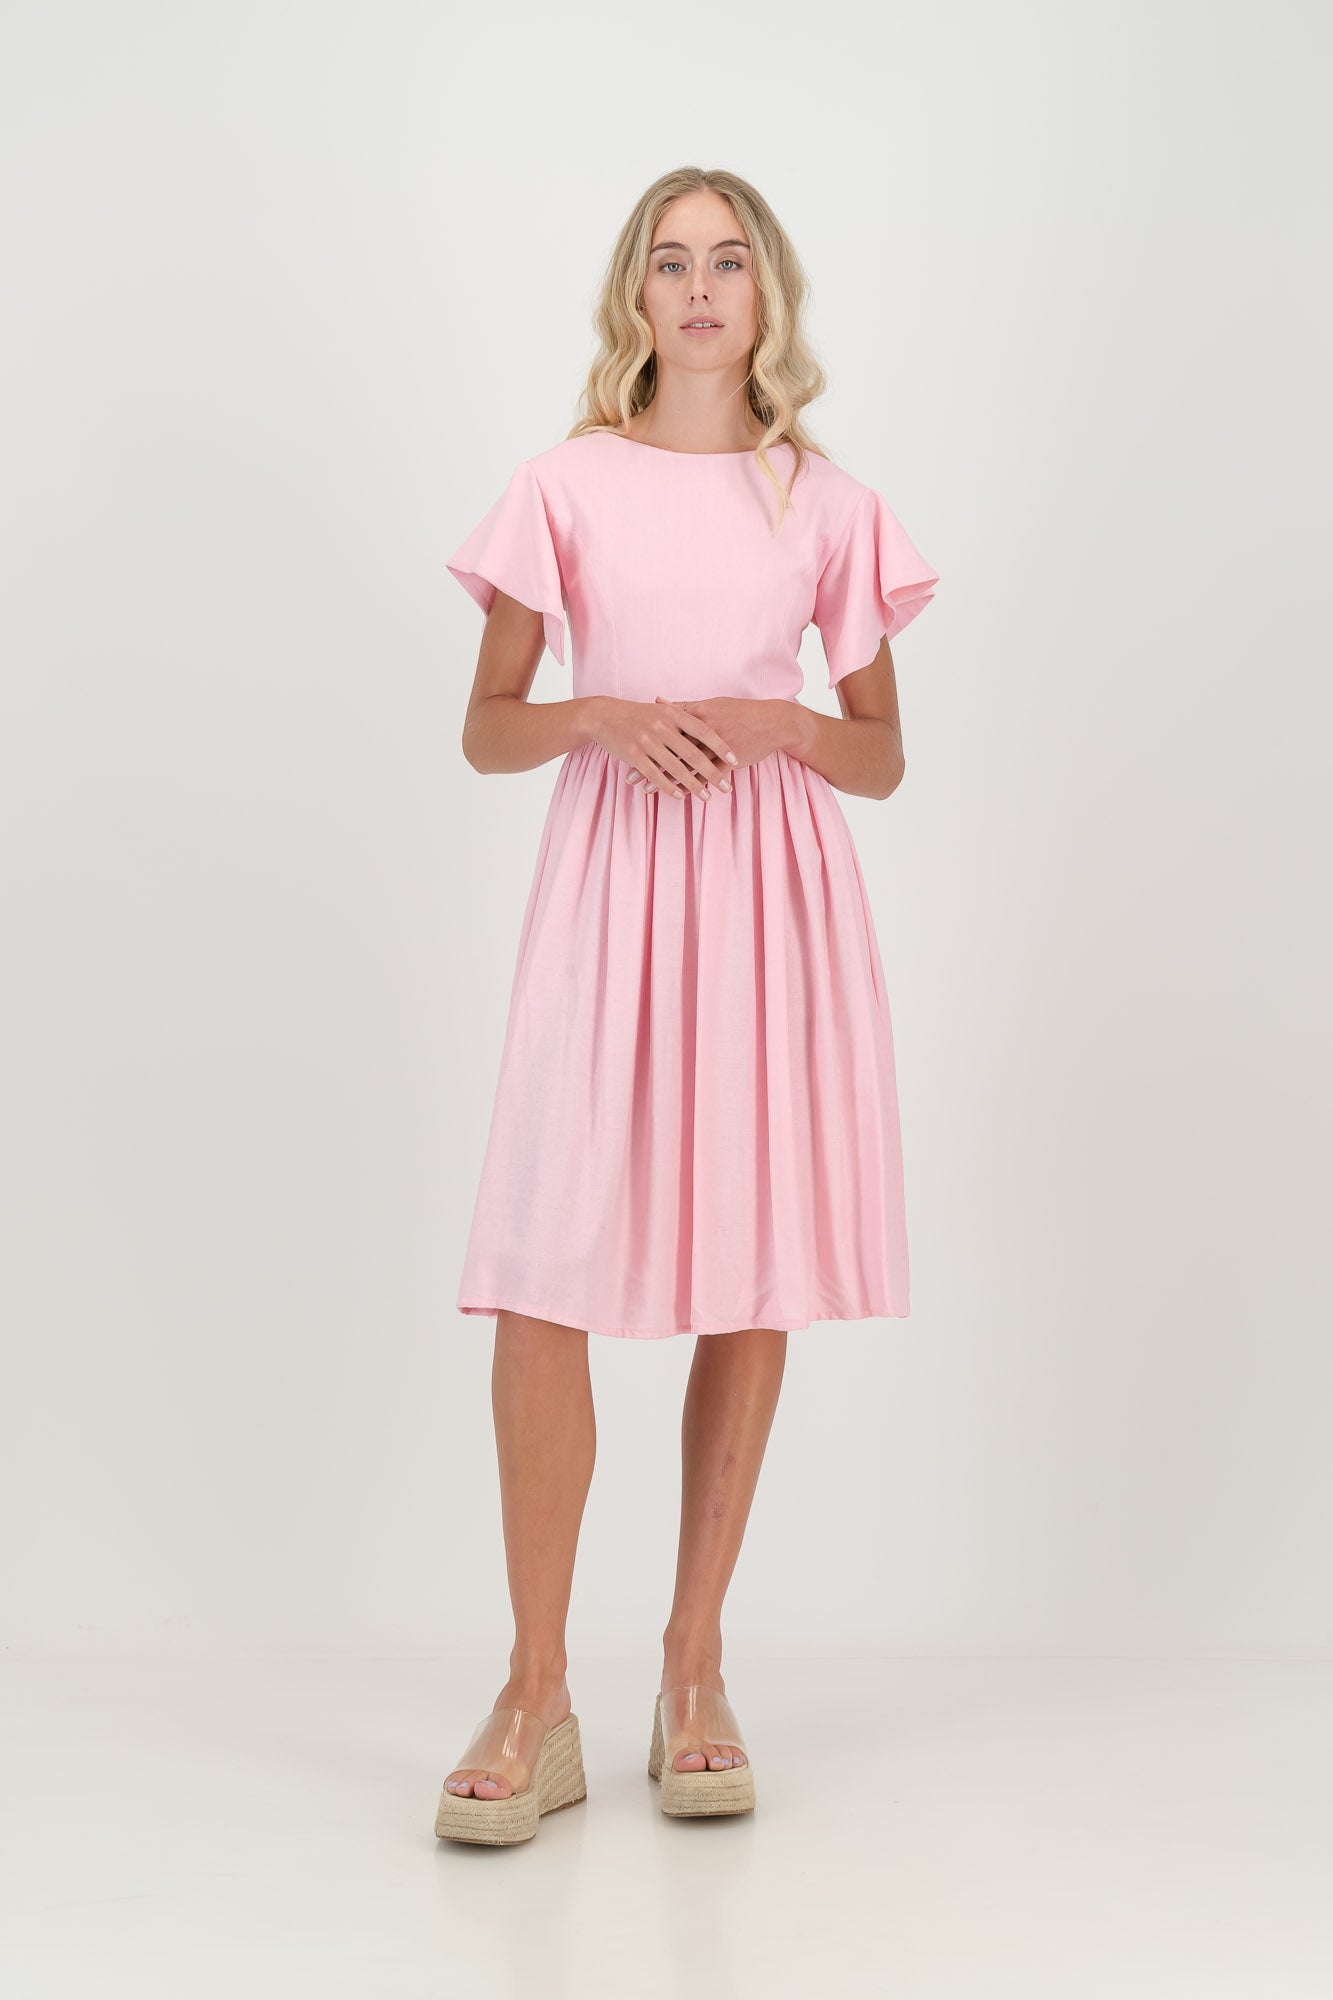 The Pink Camelia Open Back Dress